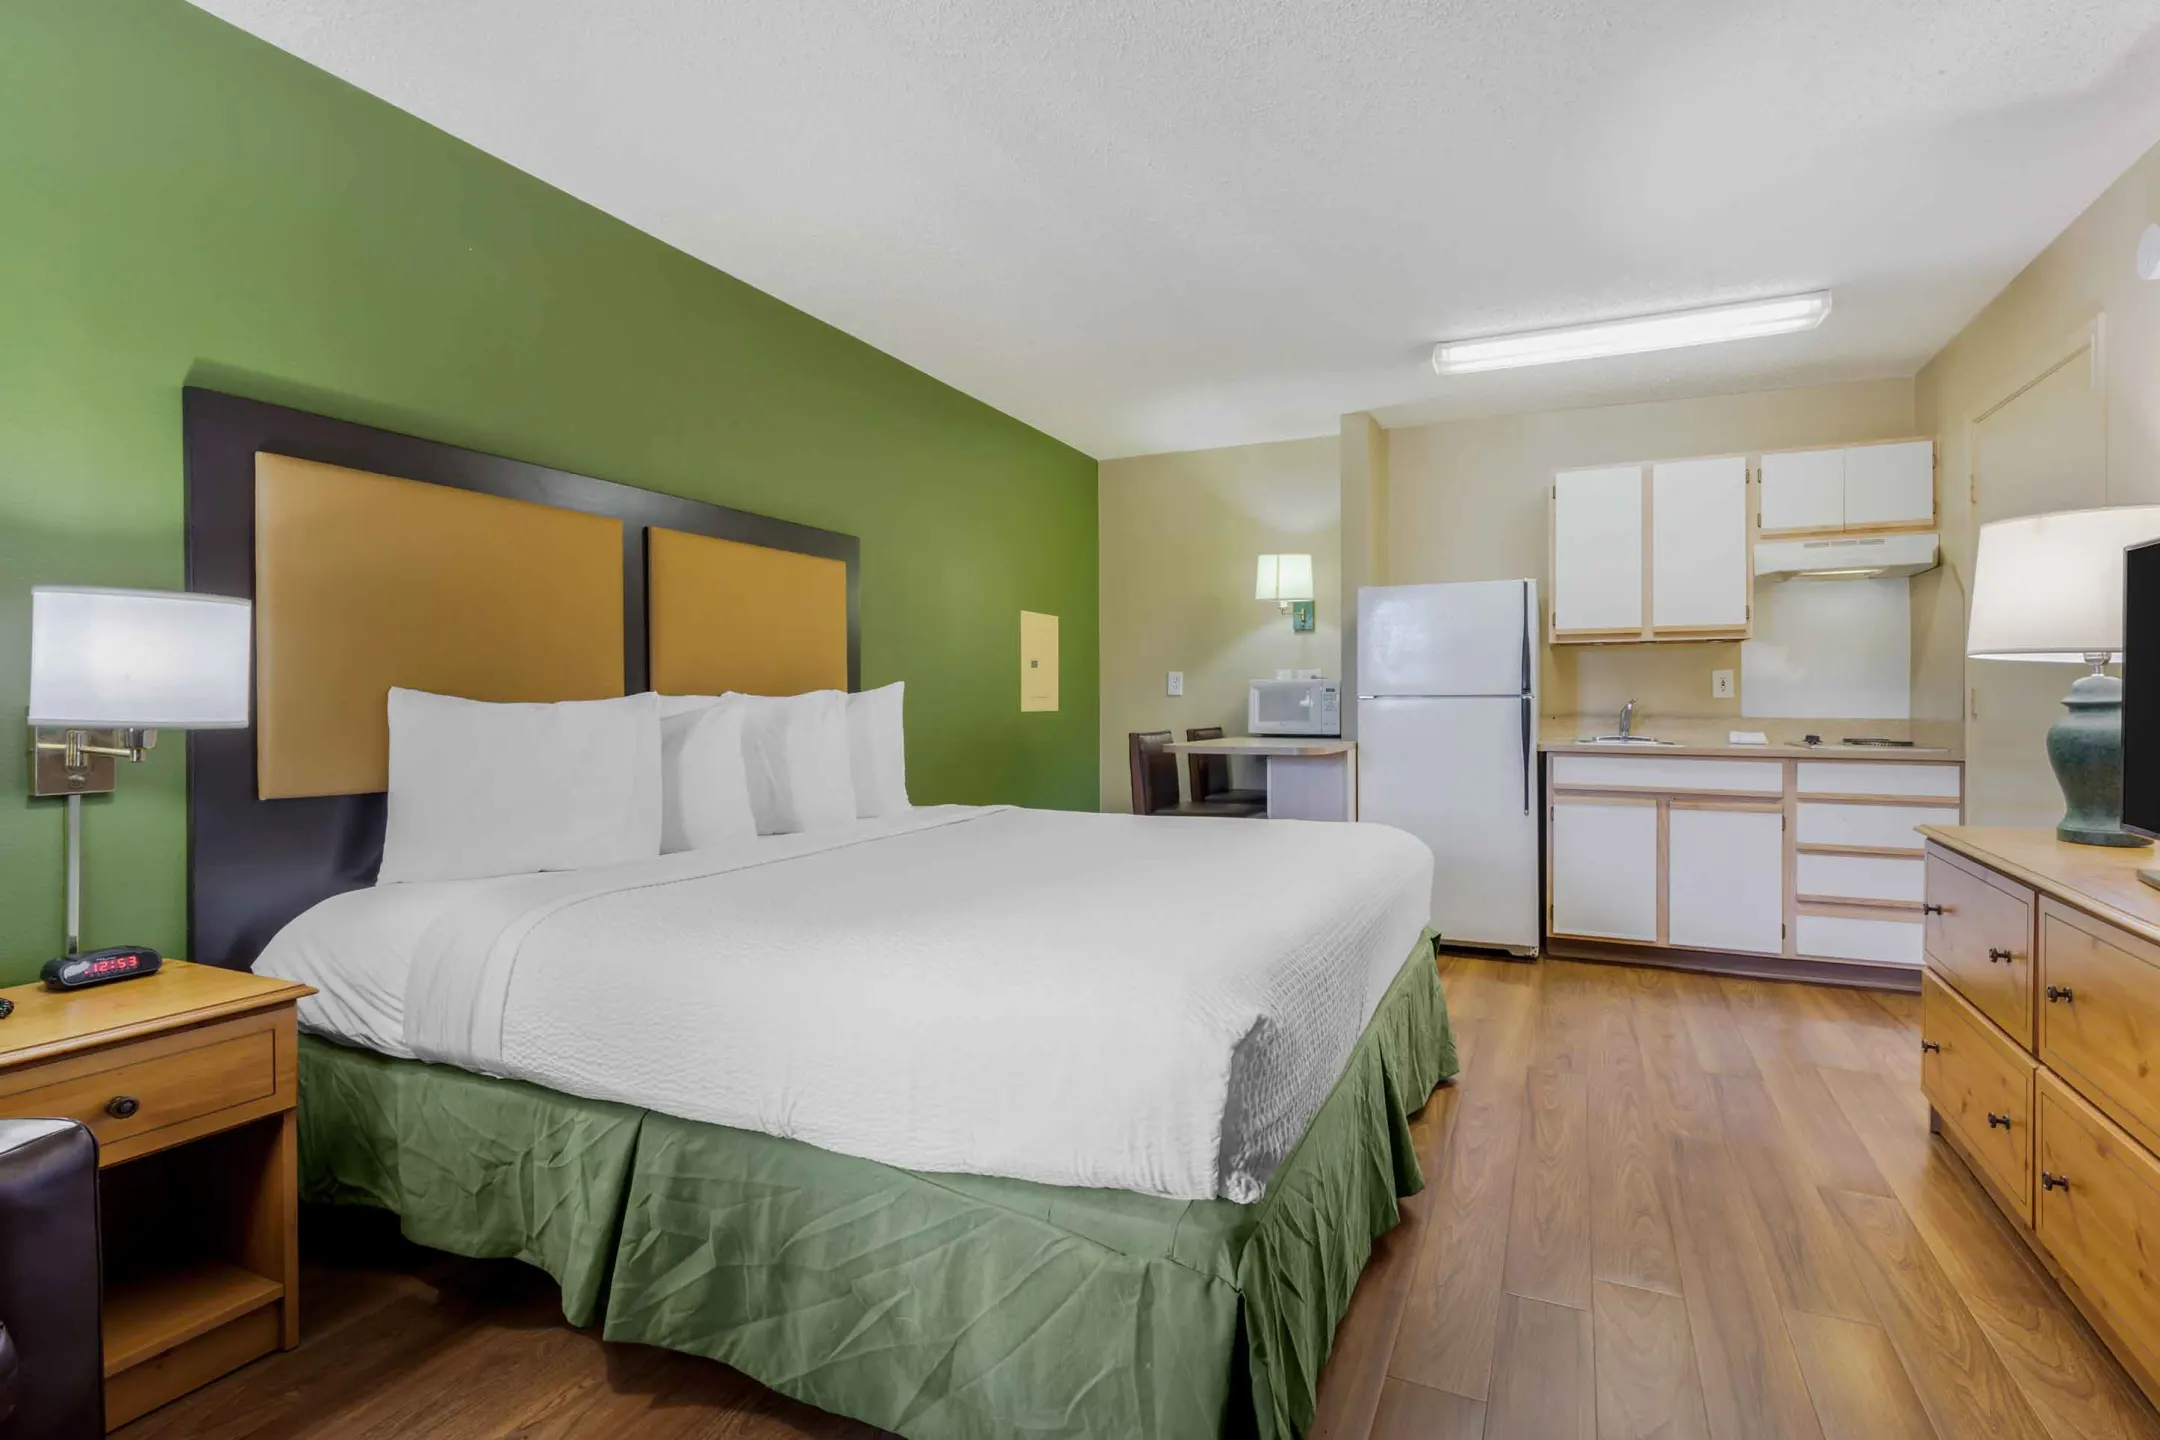 Bedroom - Furnished Studio - Dallas - Las Colinas - Carnaby St. - Irving, TX